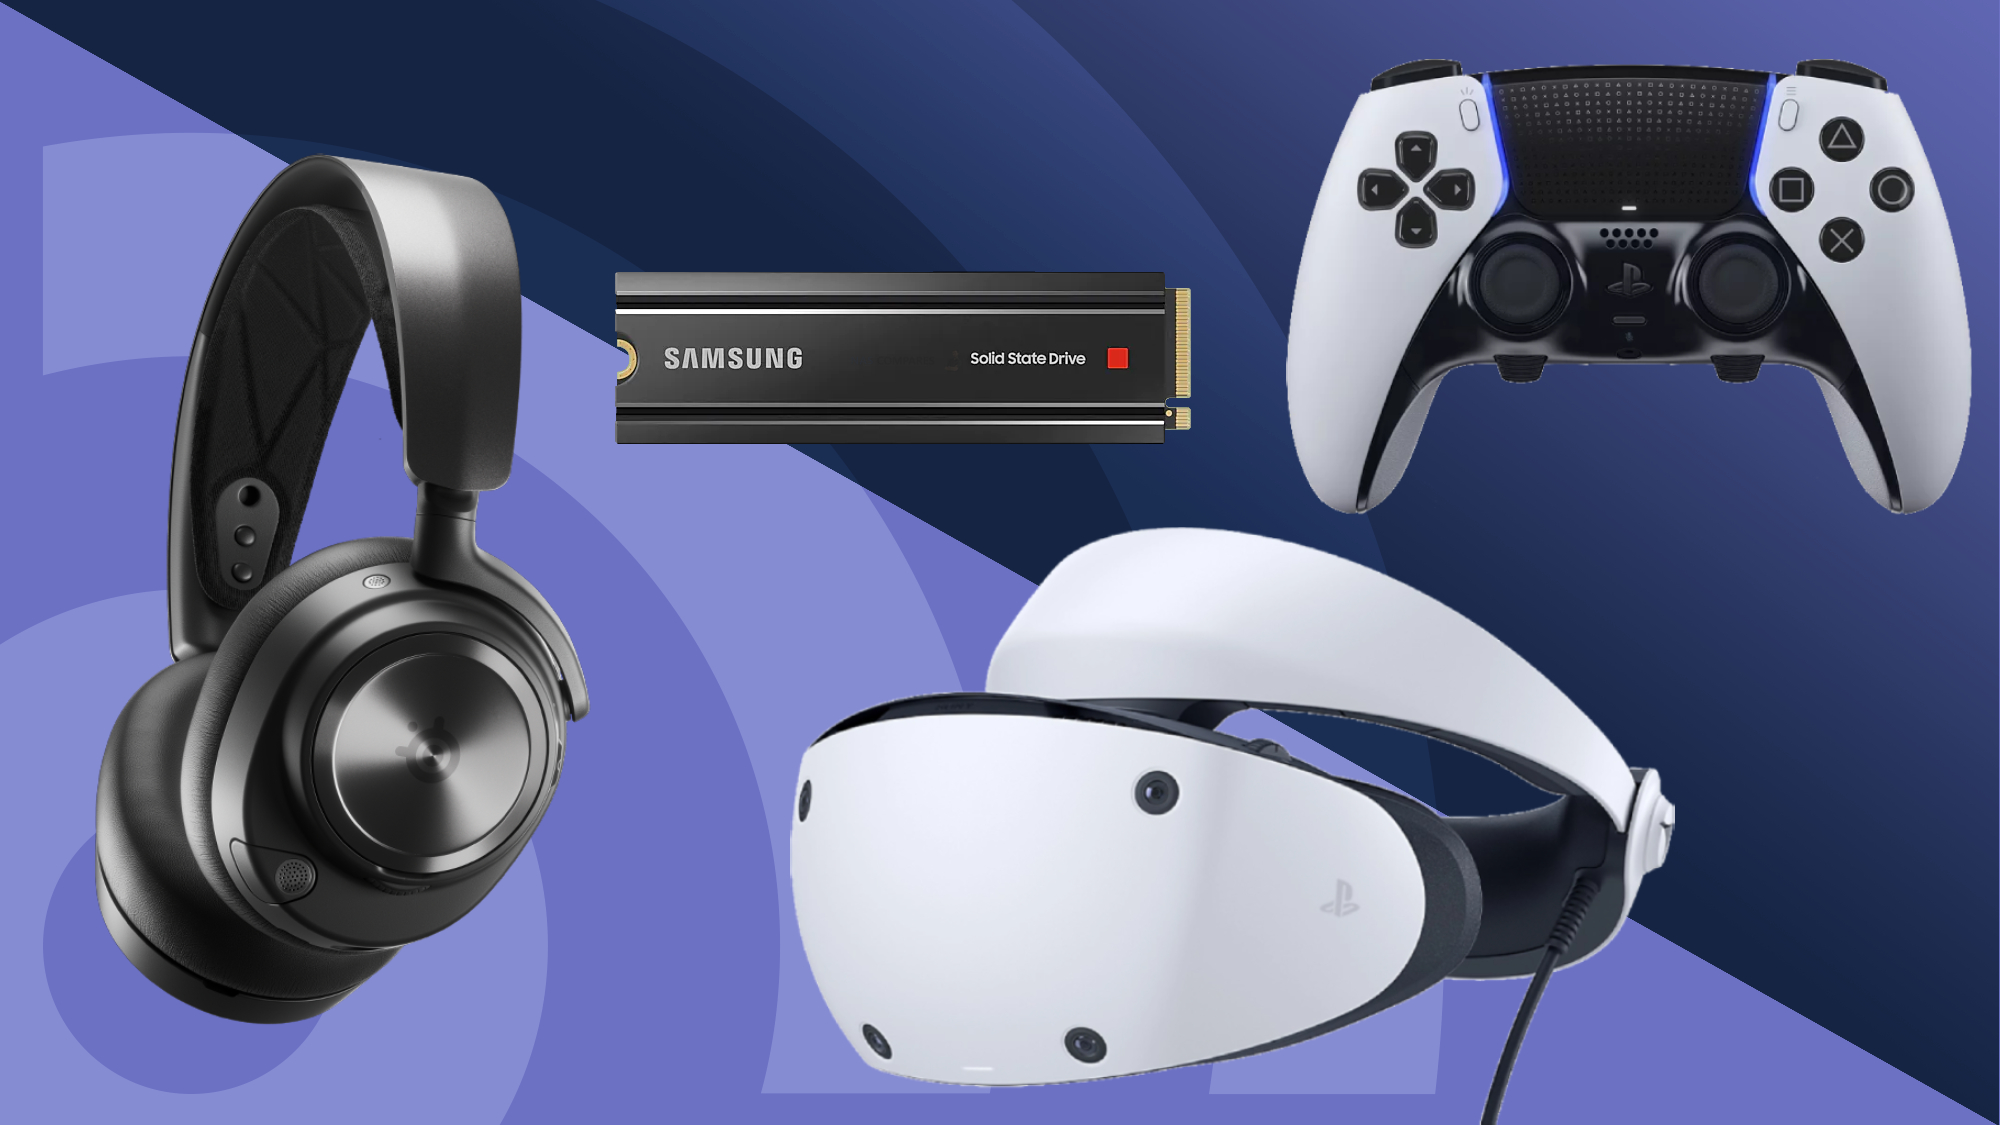 PS5 Black Friday deals: accessories, headsets and games